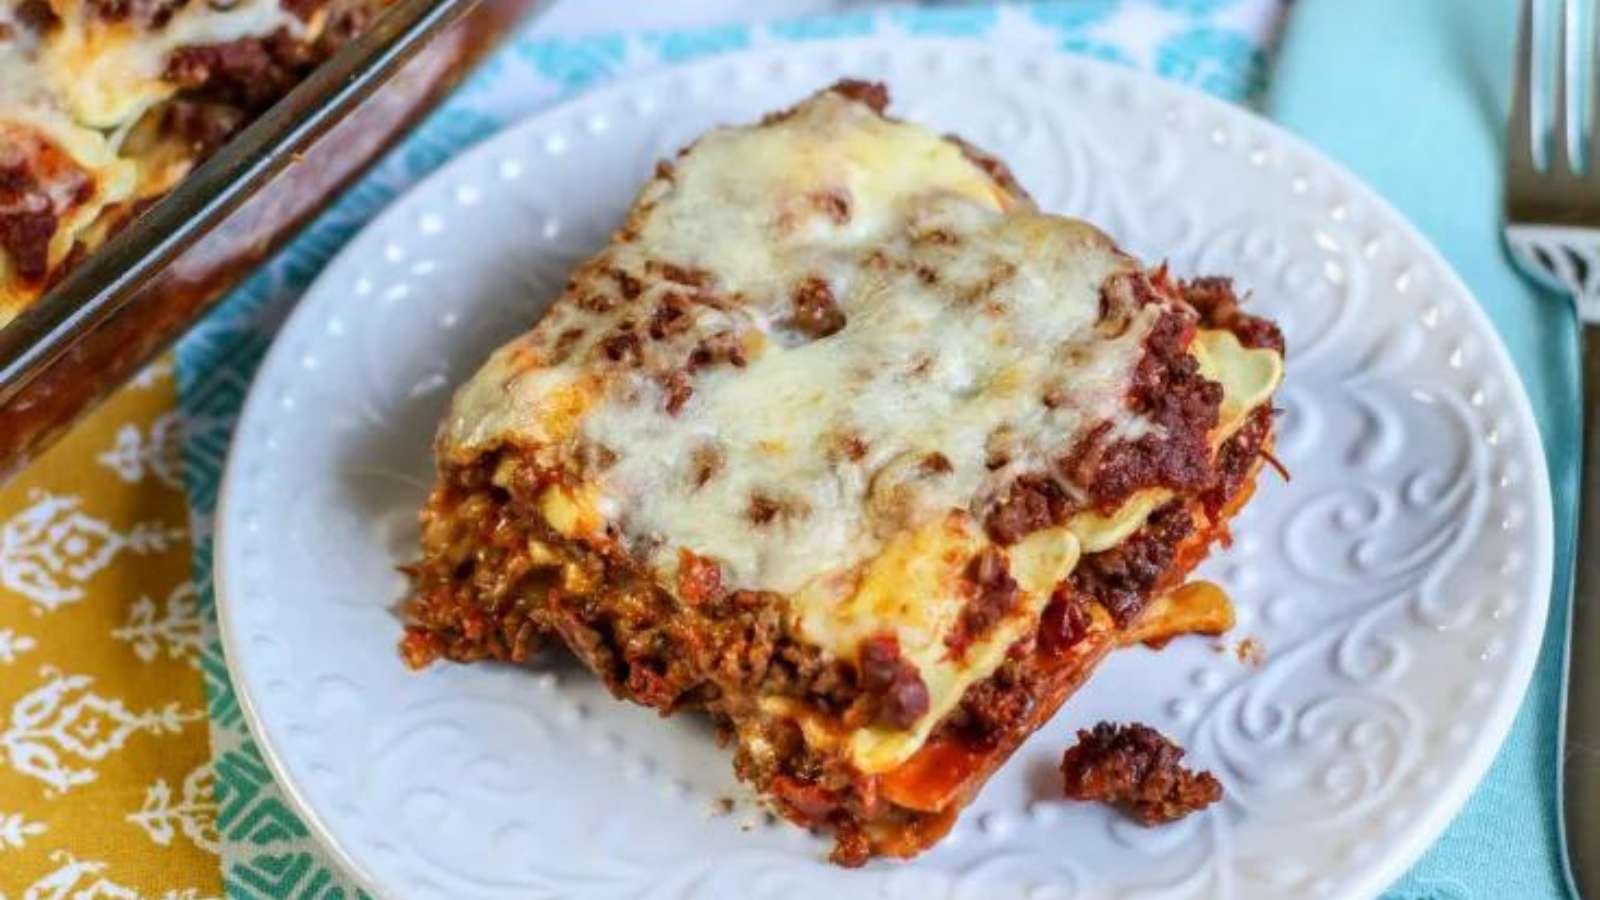 A slice of lasagna on a plate with a fork.